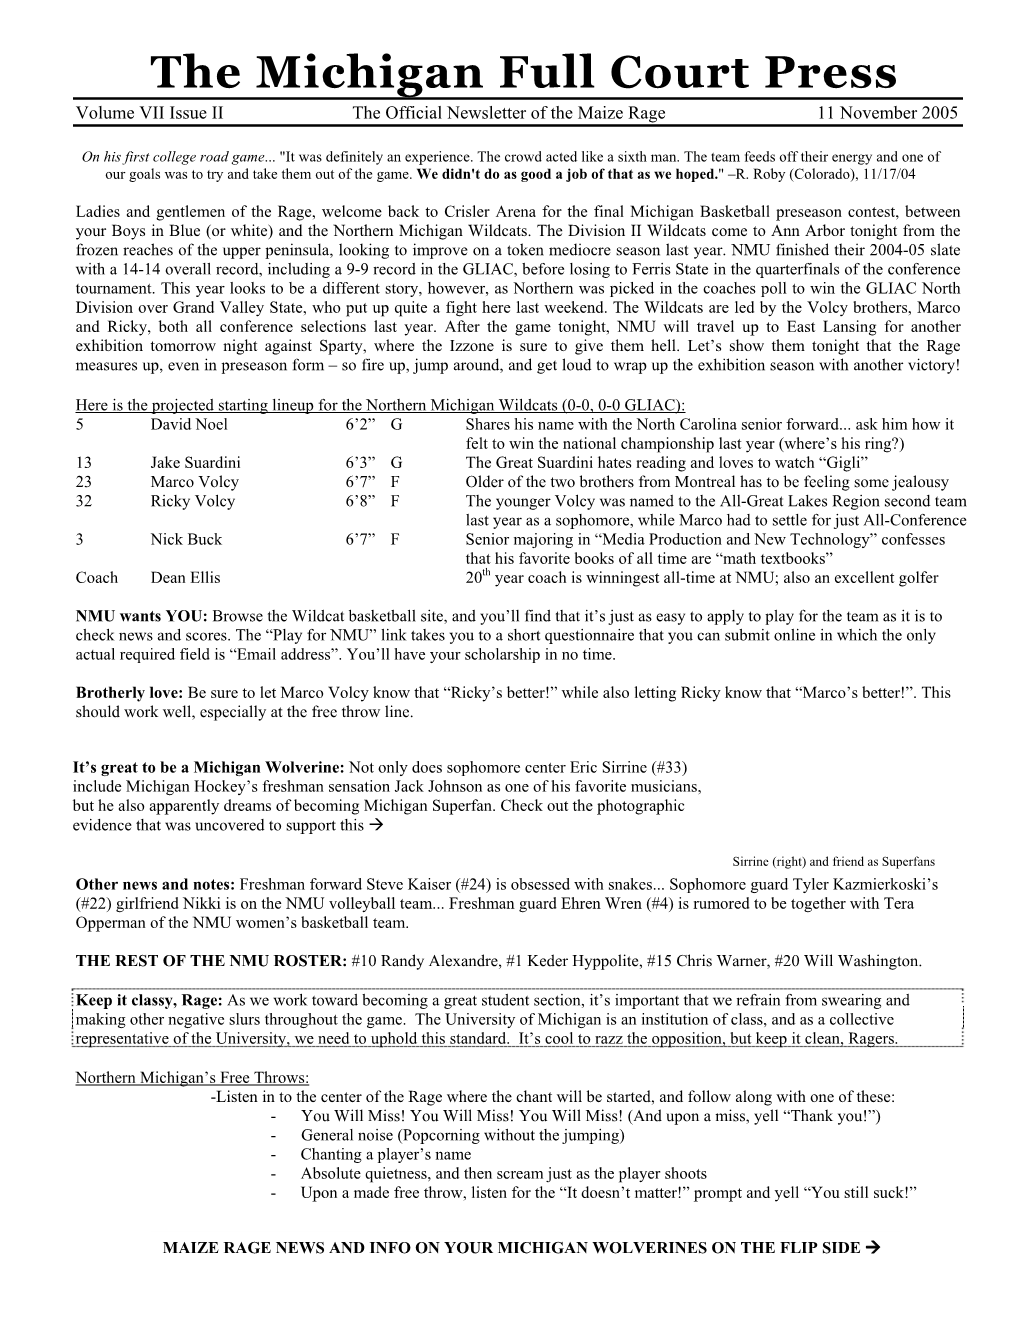 The Michigan Full Court Press Volume VII Issue II the Official Newsletter of the Maize Rage 11 November 2005